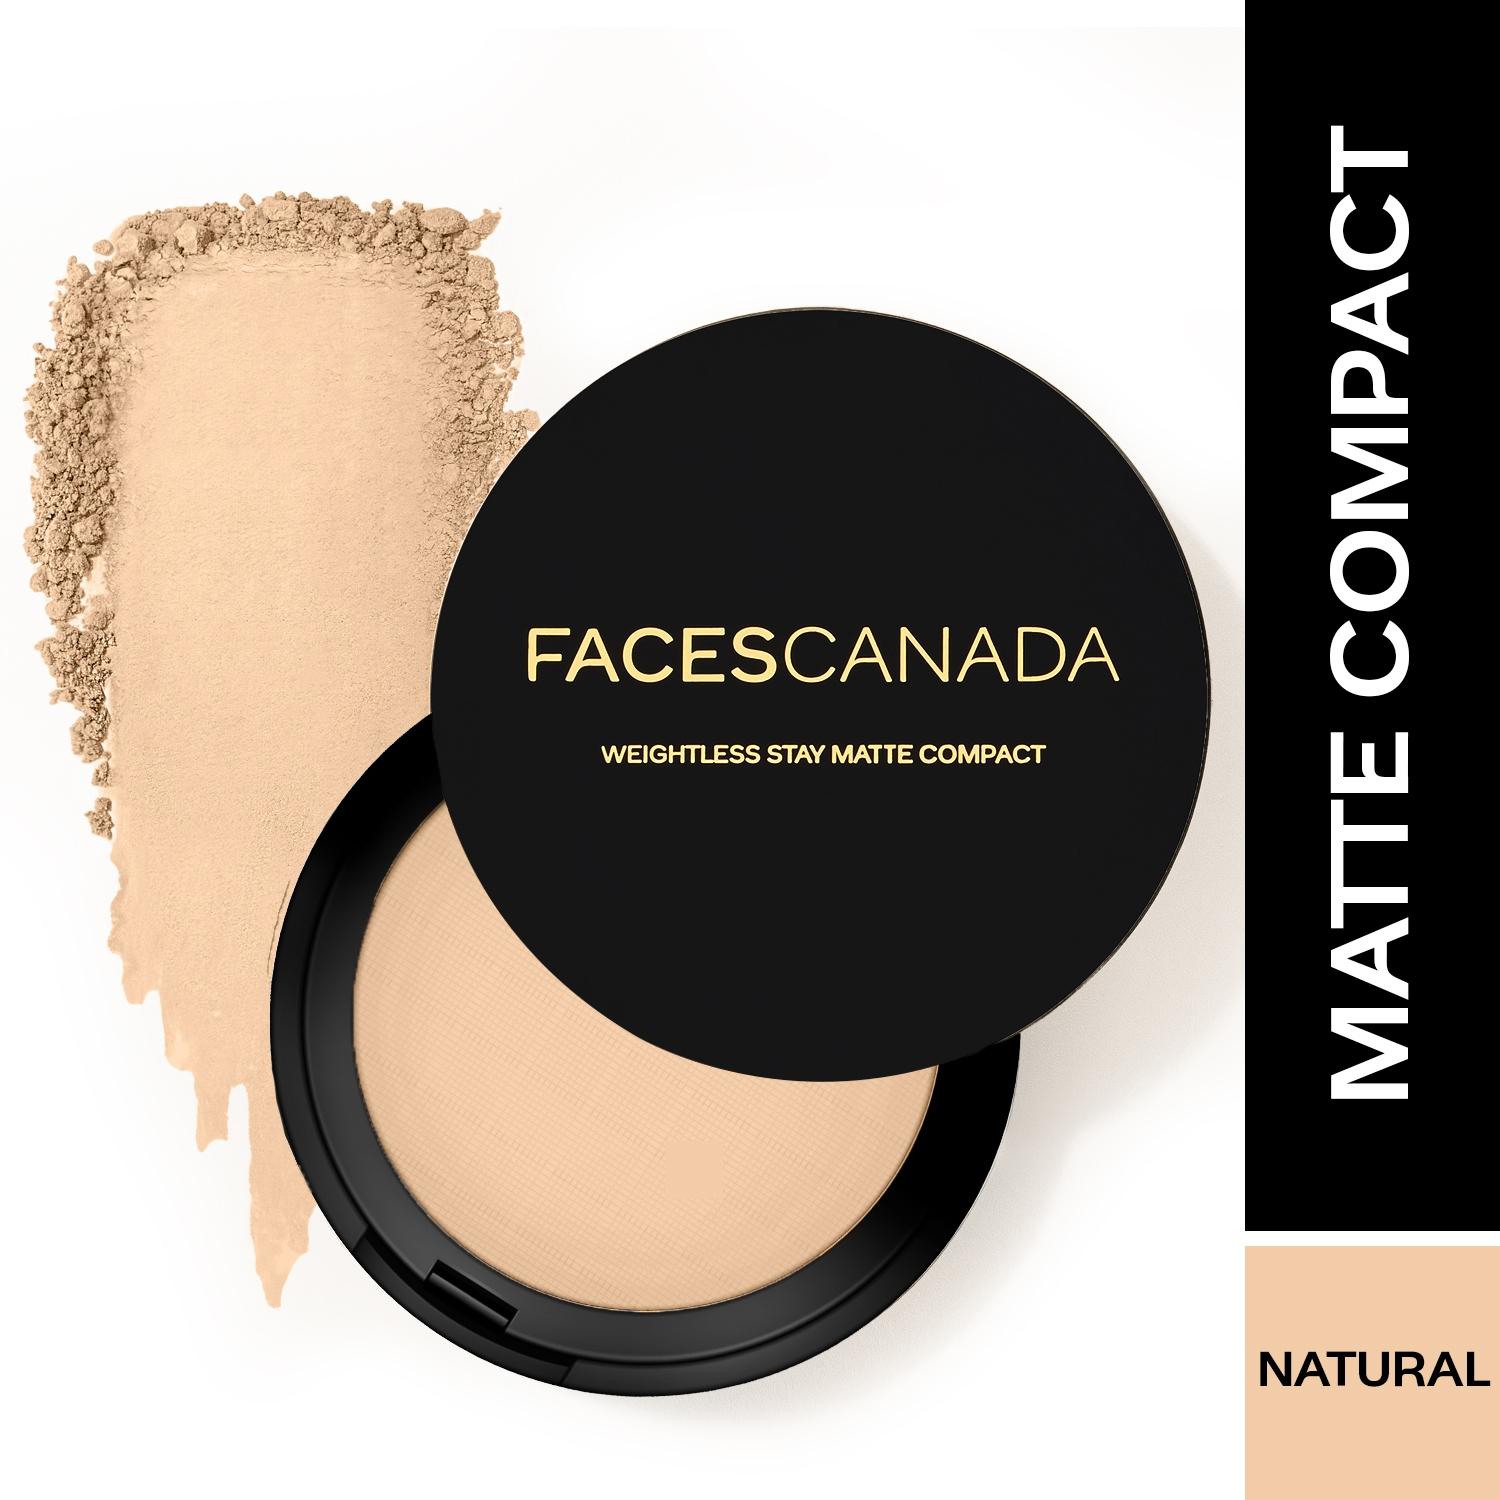 faces canada weightless stay matte compact spf 20 - 02 natural (9g)